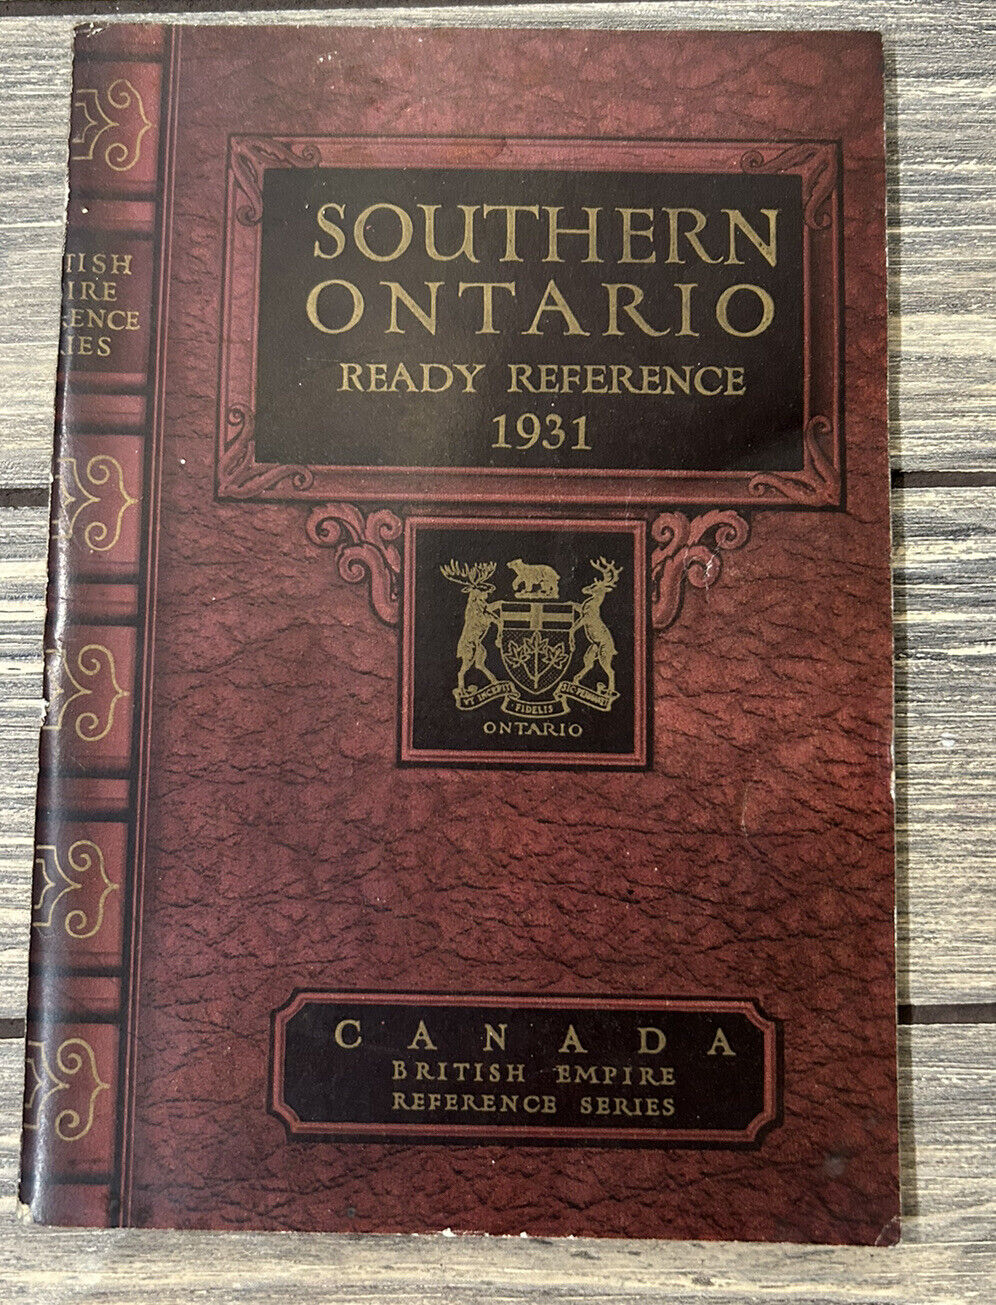 Vintage 1932 Southern Ontario Ready Reference Canada British Empire Reference 